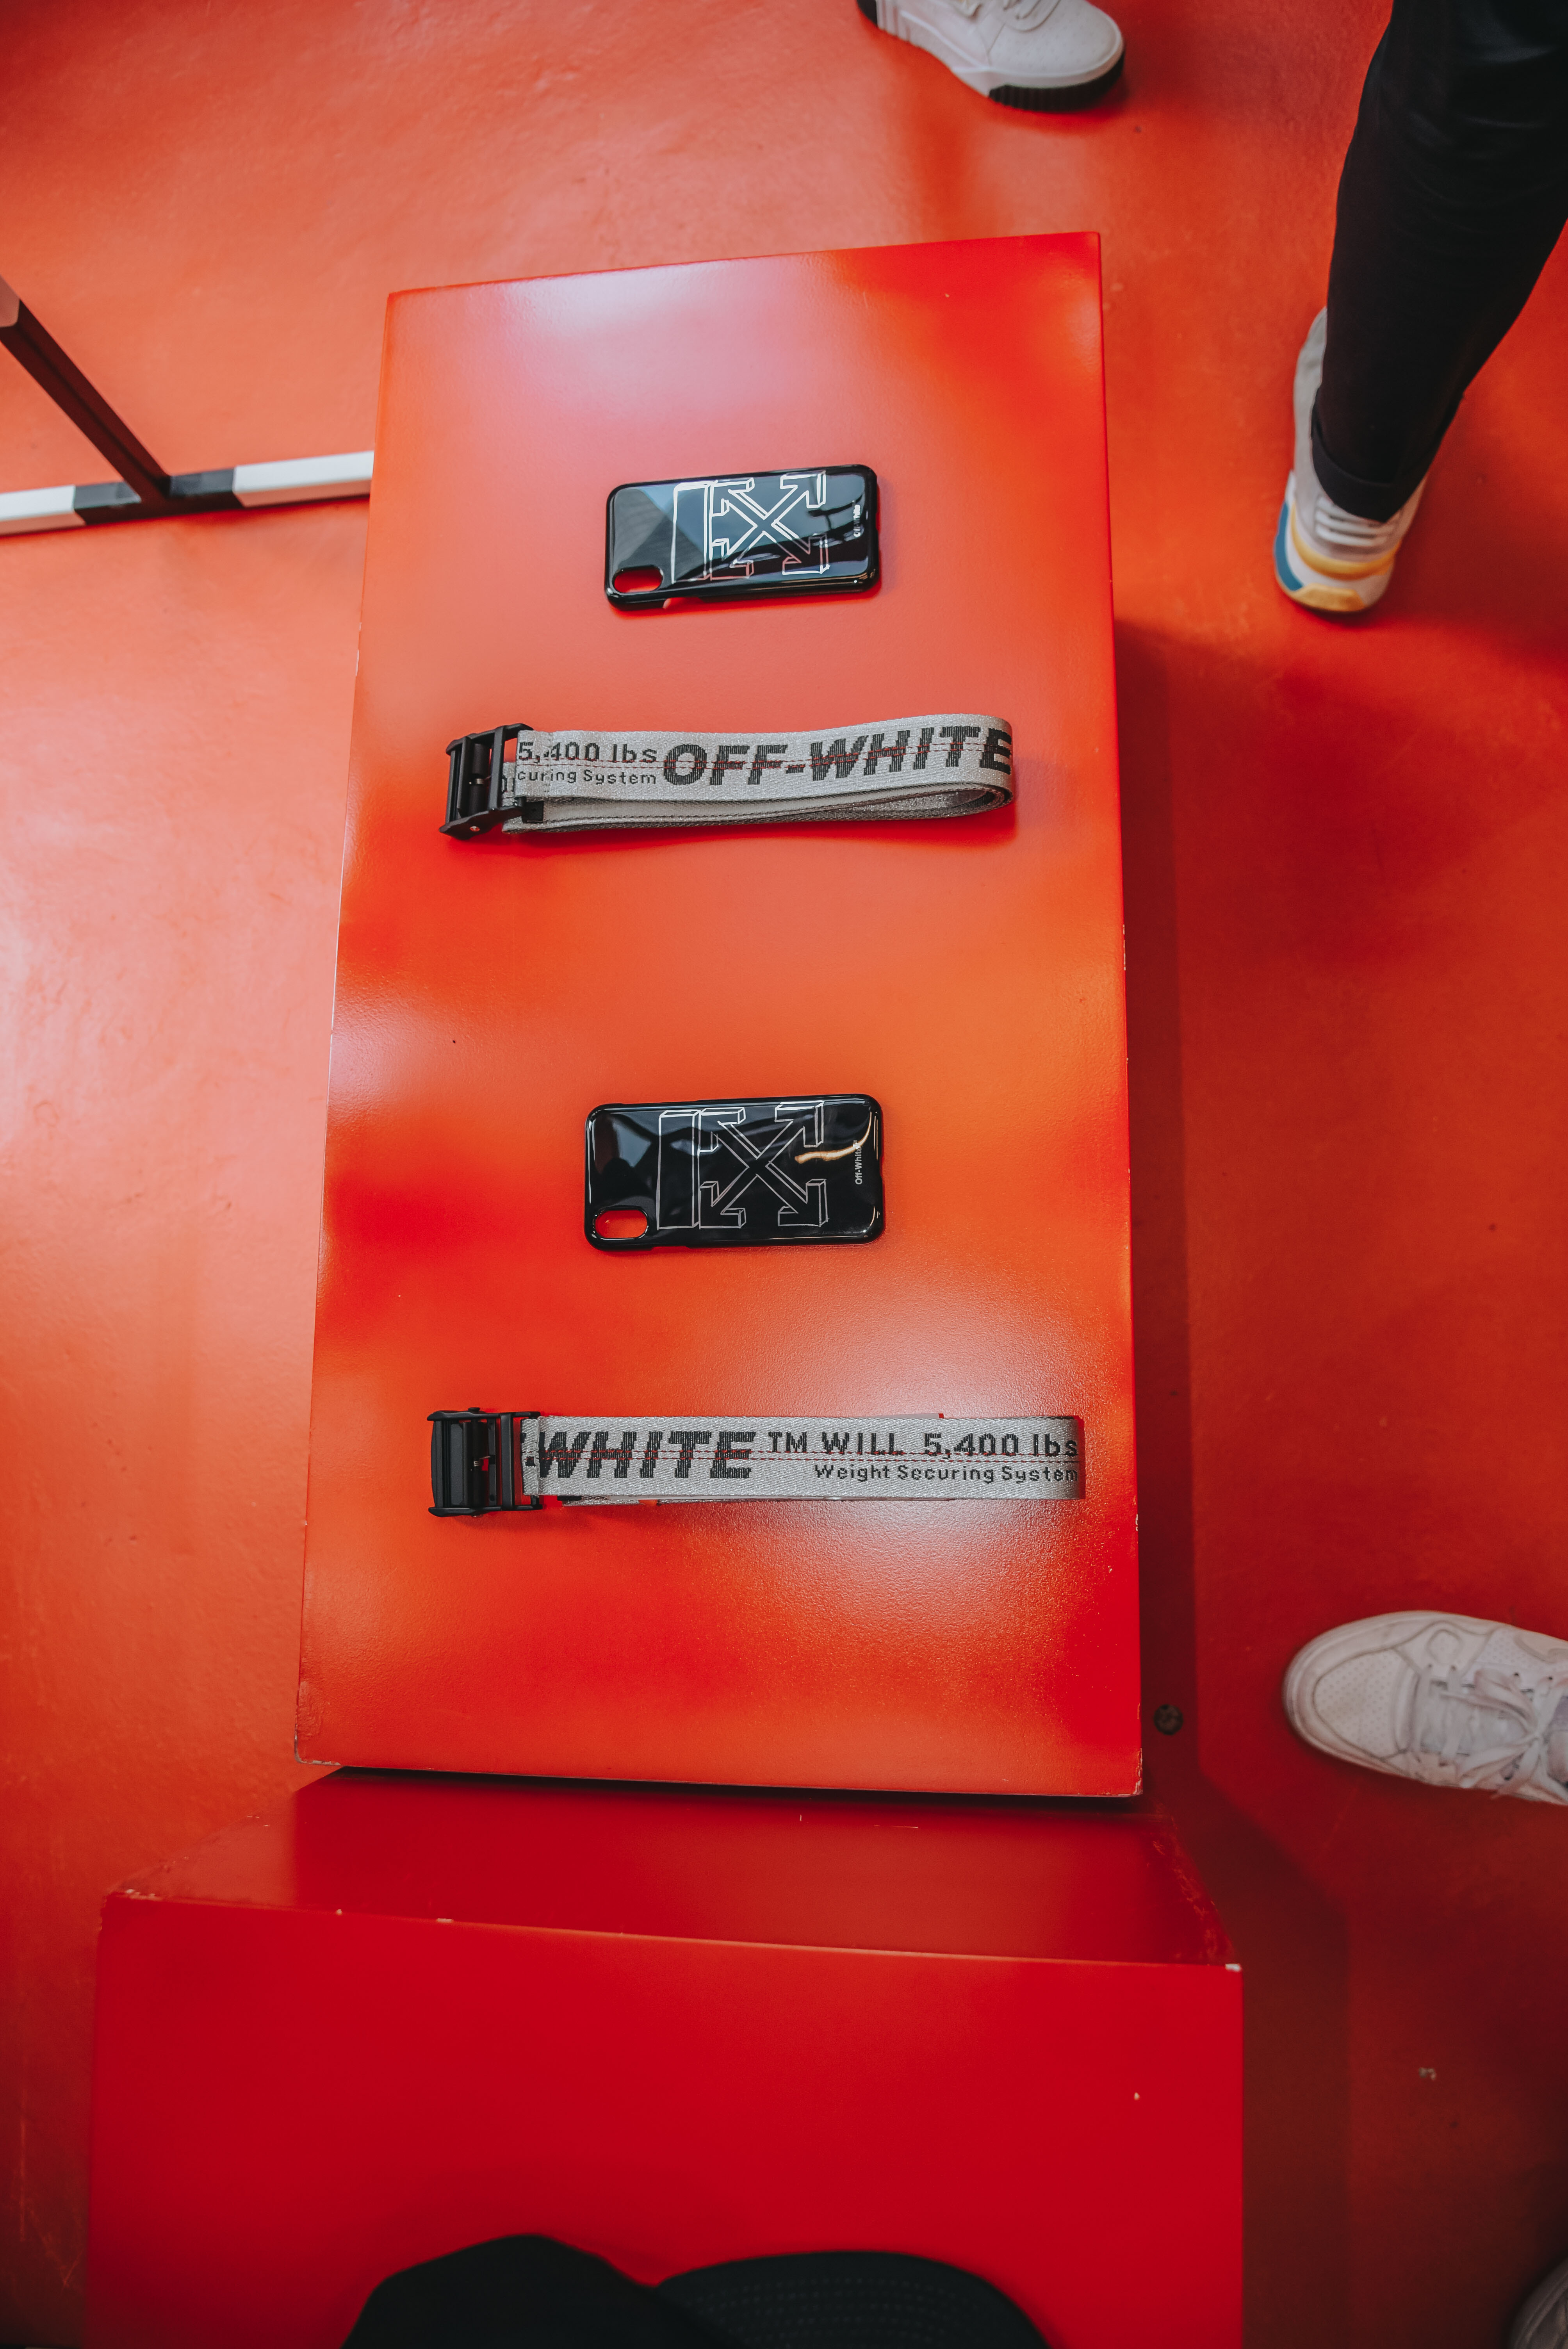 Off-White Kuala Lumpur Releases Exclusive KL Capsule Collection - MASSES